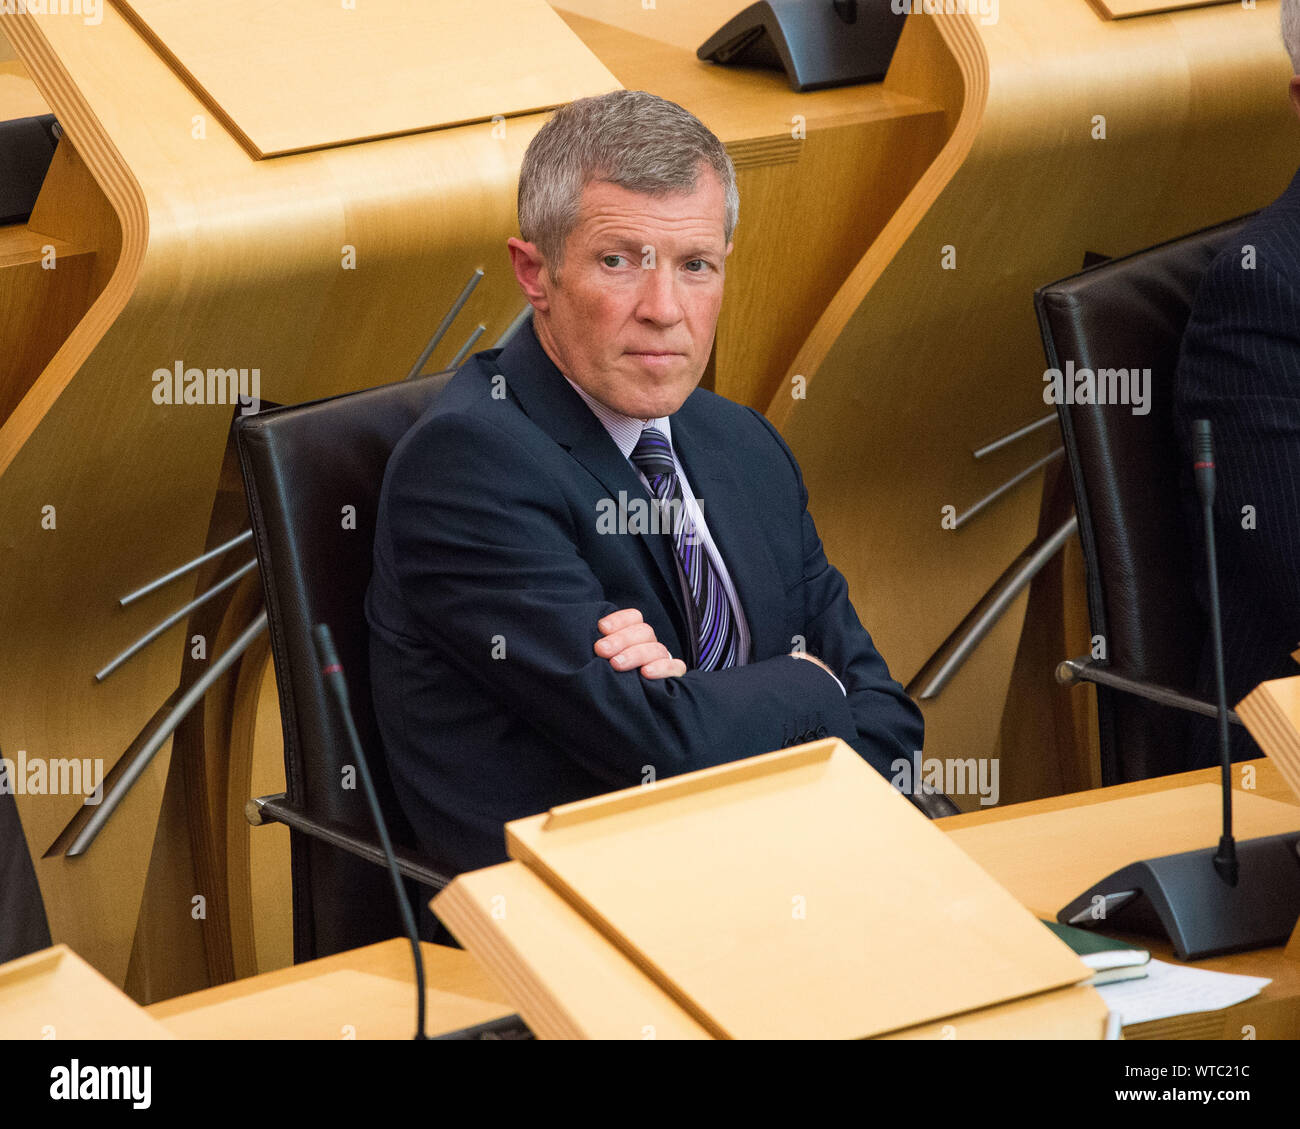 Edinburgh, UK. 5 September 2019. Pictured: Willie Rennie MSP - Leader of the Scottish Liberal Democrat Party. Scottish Government Debate: Avoiding A No Deal Exit From The EU.  That the Parliament agrees that the UK should in no circumstances leave the EU on a no-deal basis, and condemns the Prime Minister’s suspension of the UK Parliament from as early as 9 September until 14 October 2019. The result of the division is: For 87, Against 28, Abstentions 0. Colin Fisher/CDFIMAGES.COM Stock Photo